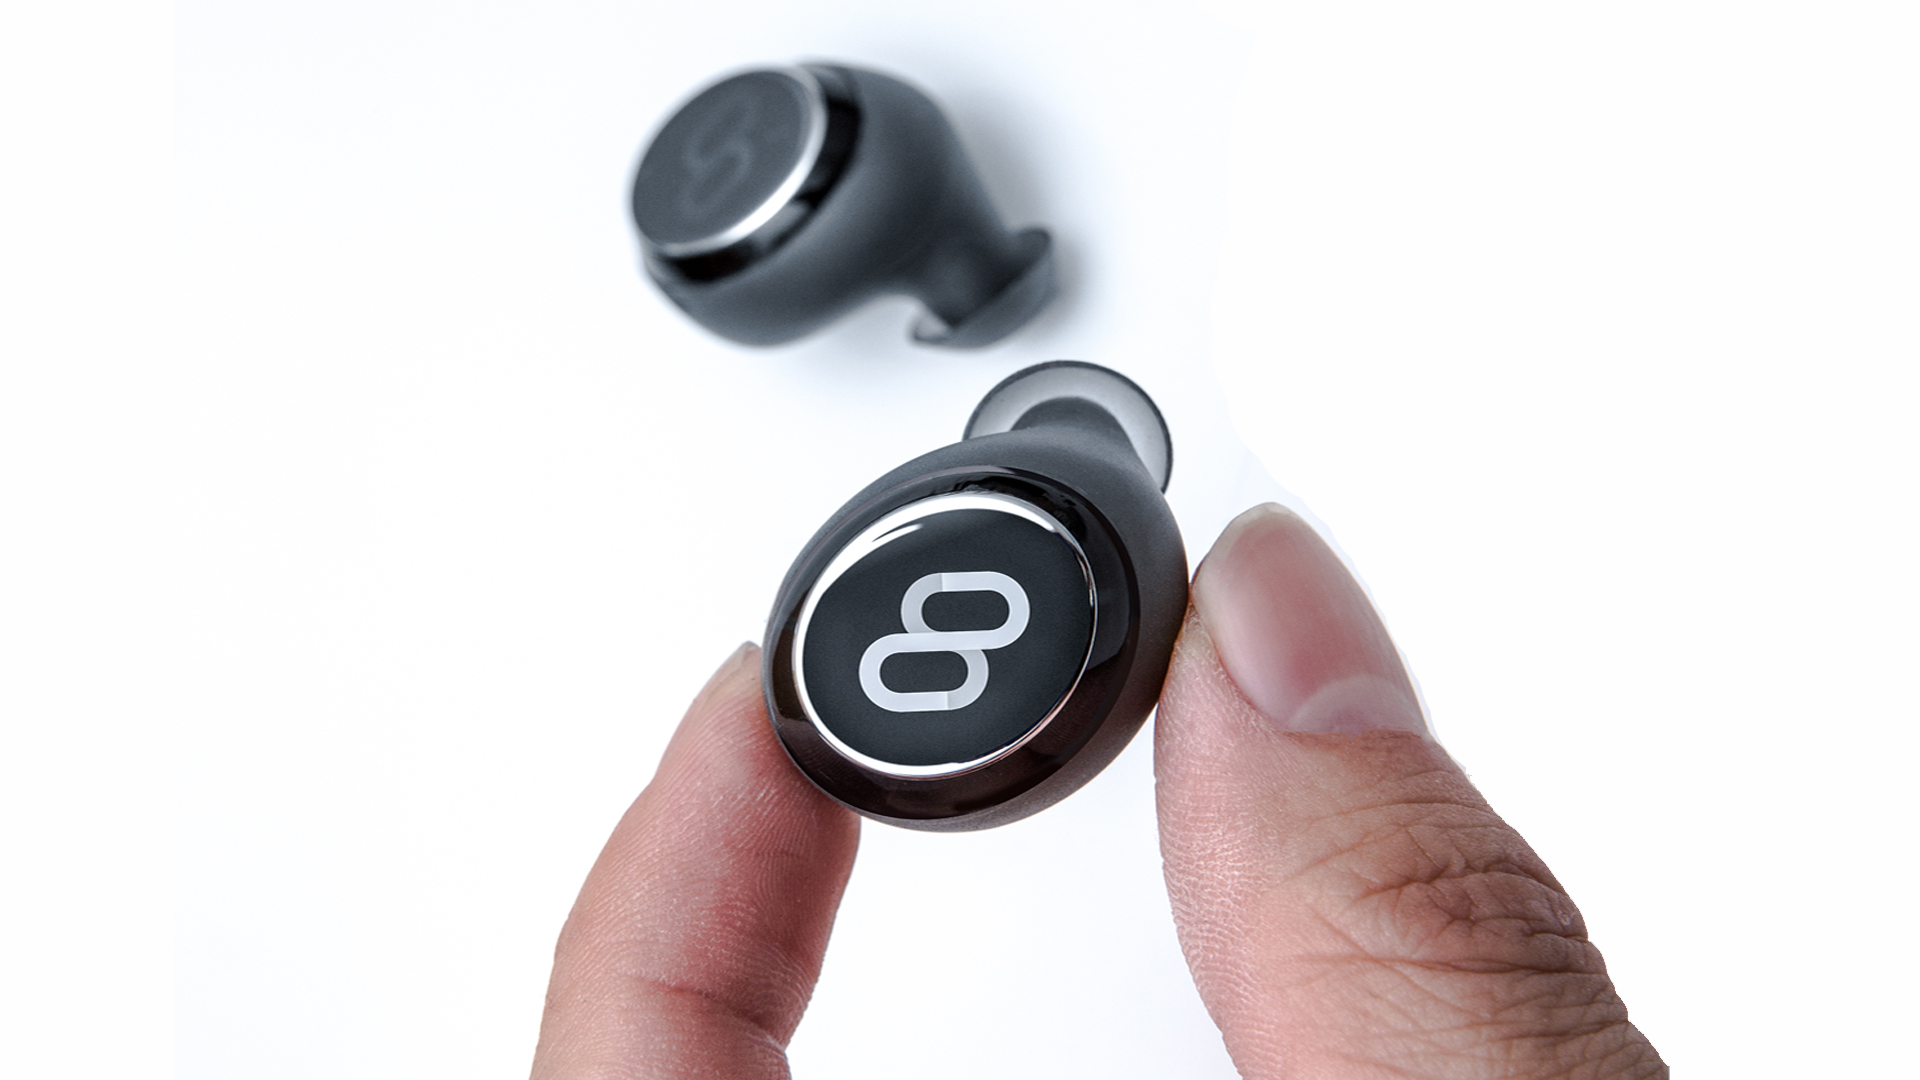 Featured at CES in Las Vegas were headphones that can translate languages in real time